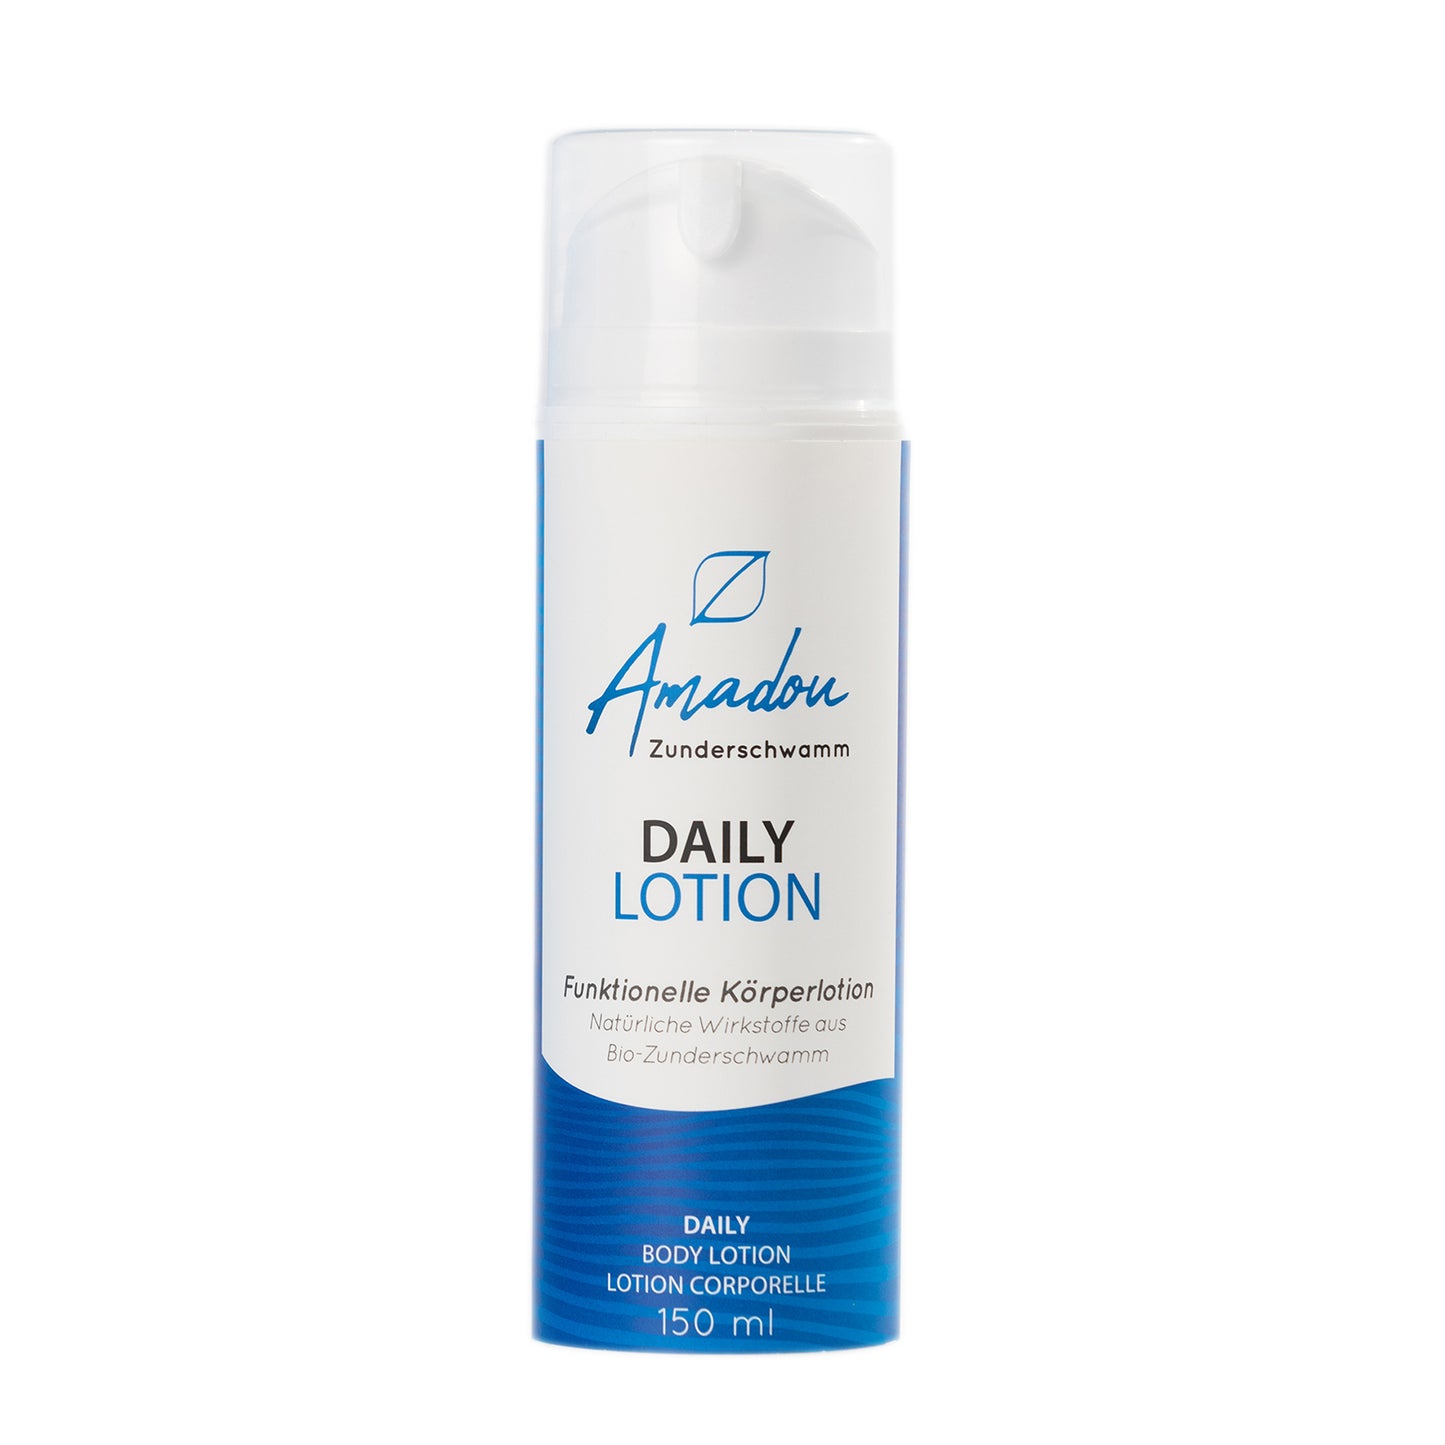 Amadou DAILY LOTION